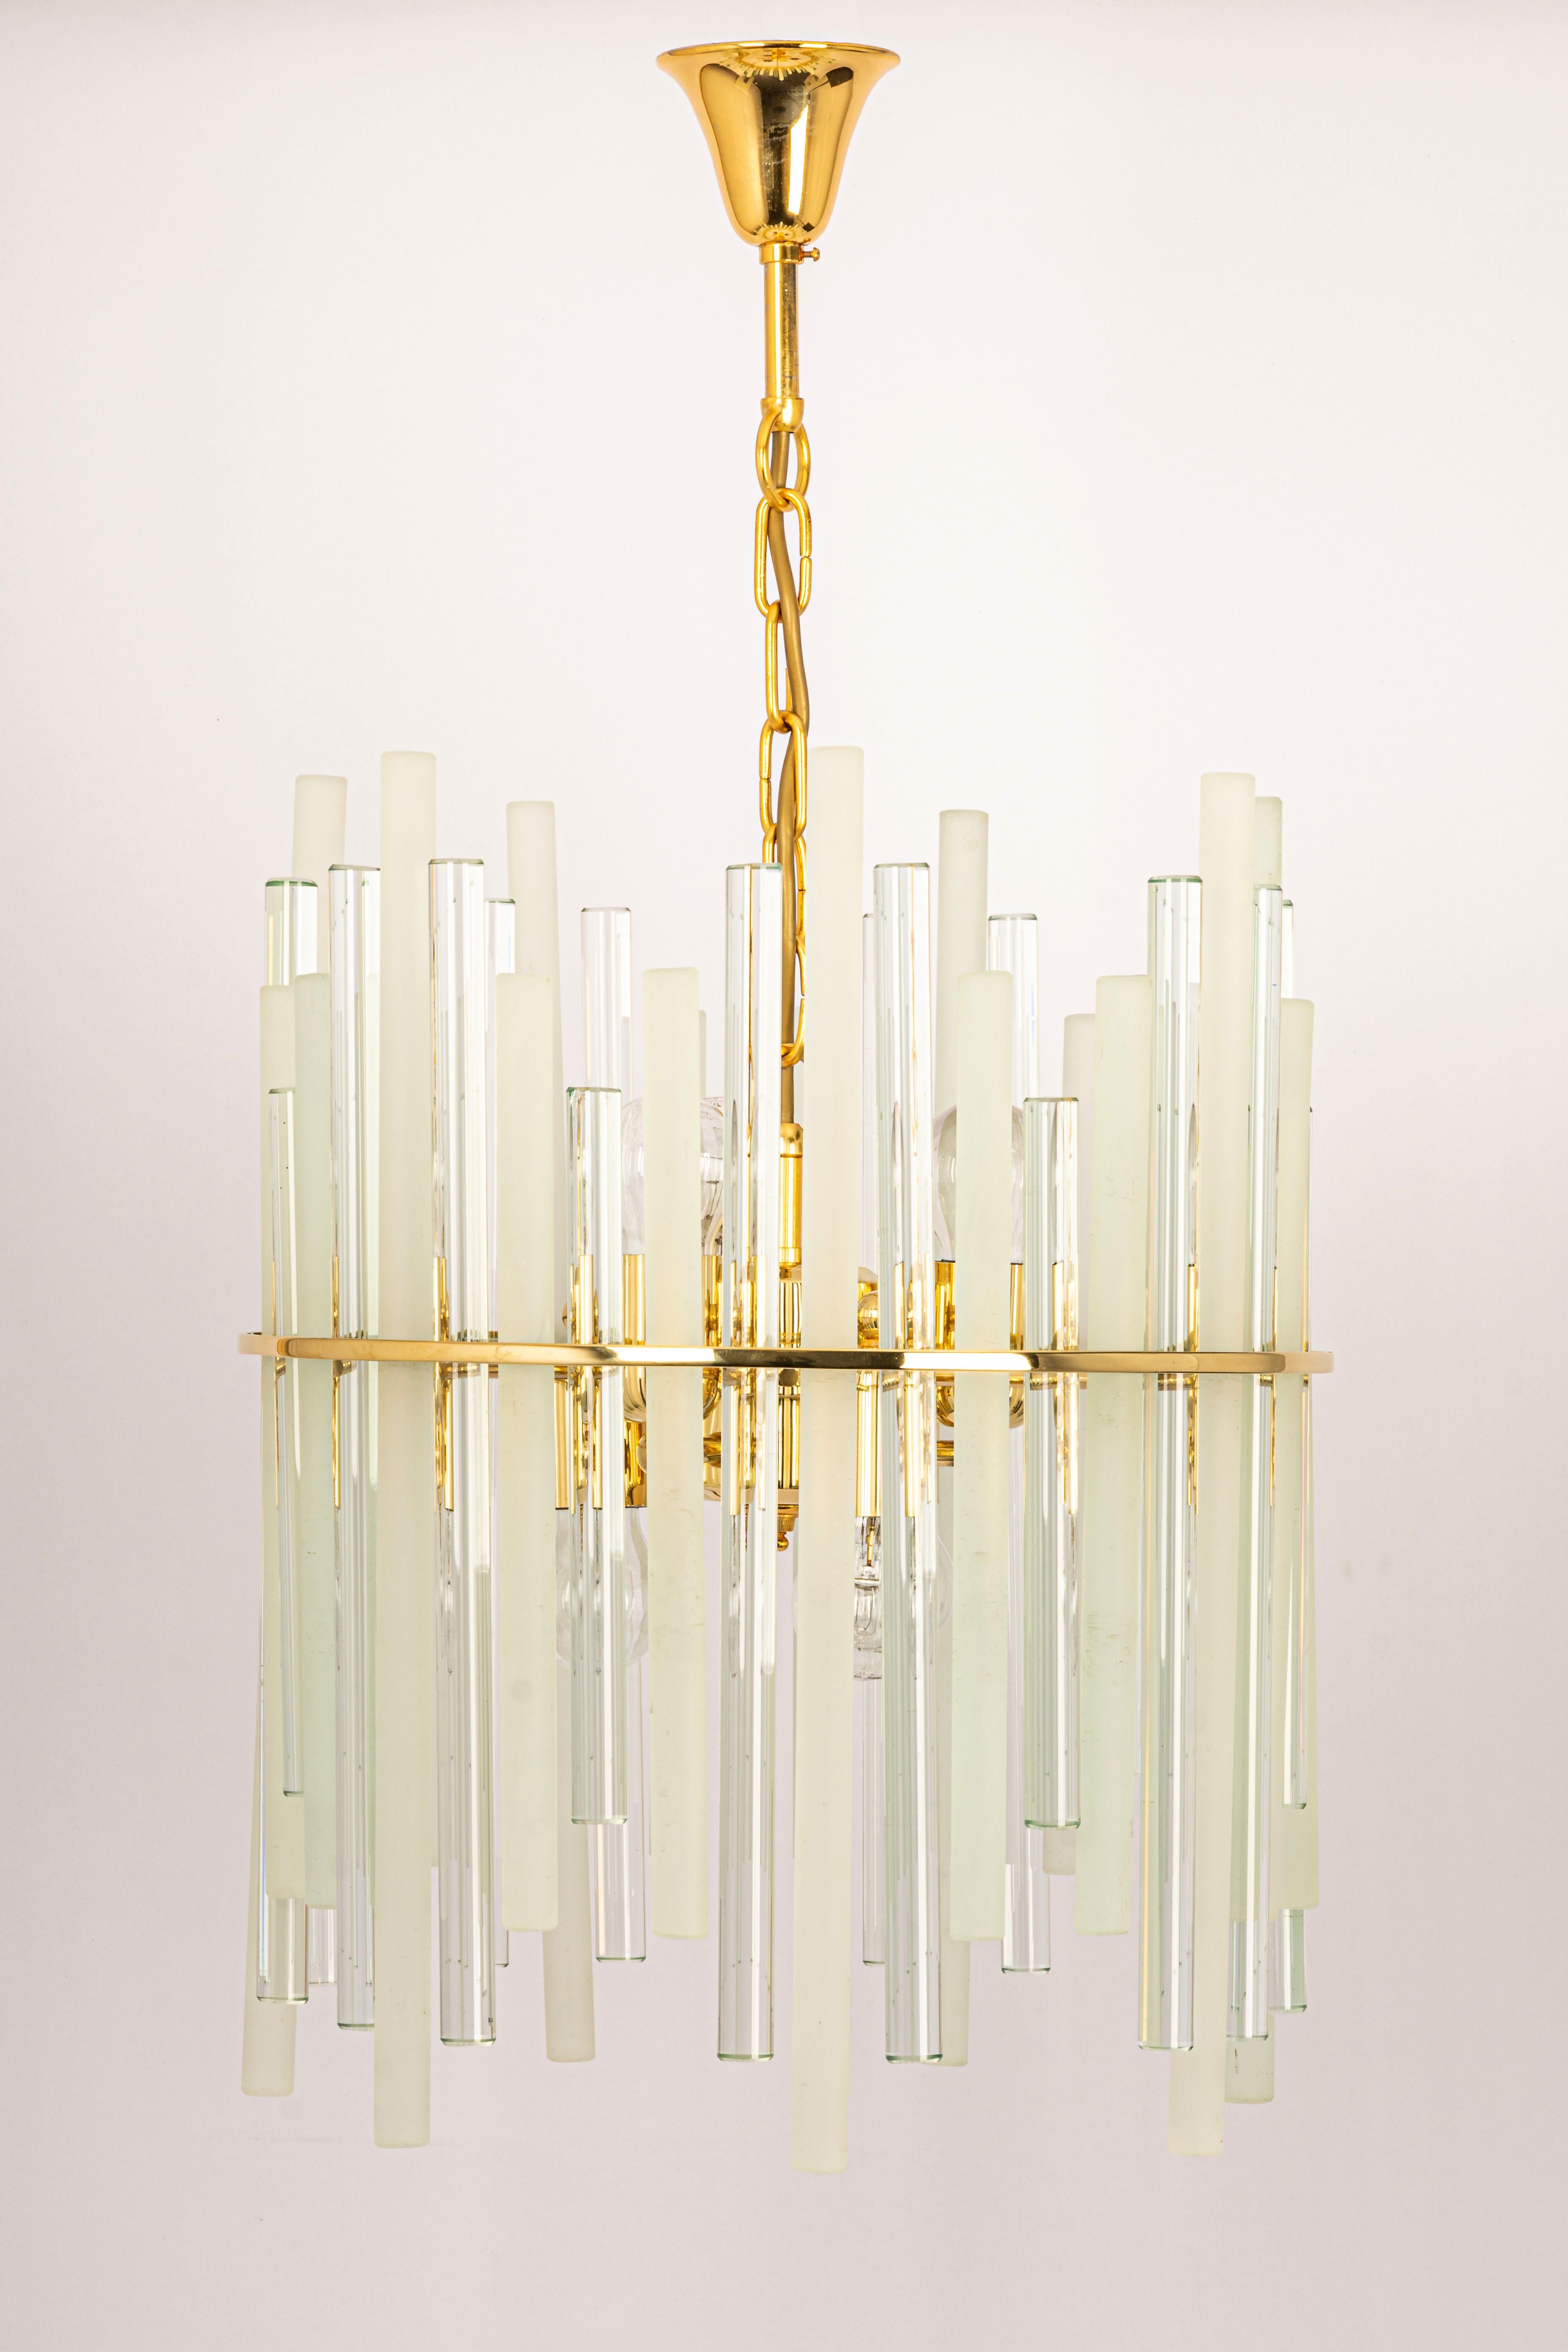 A stunning chandelier by Christoph Palme Germany, manufactured in 1970s. It’s composed of crystal glass rods on a brass frame.

Sockets: It needs 6 x E27 standard bulbs ( max. 80 Watts each)
Light bulbs are not included. It is possible to install